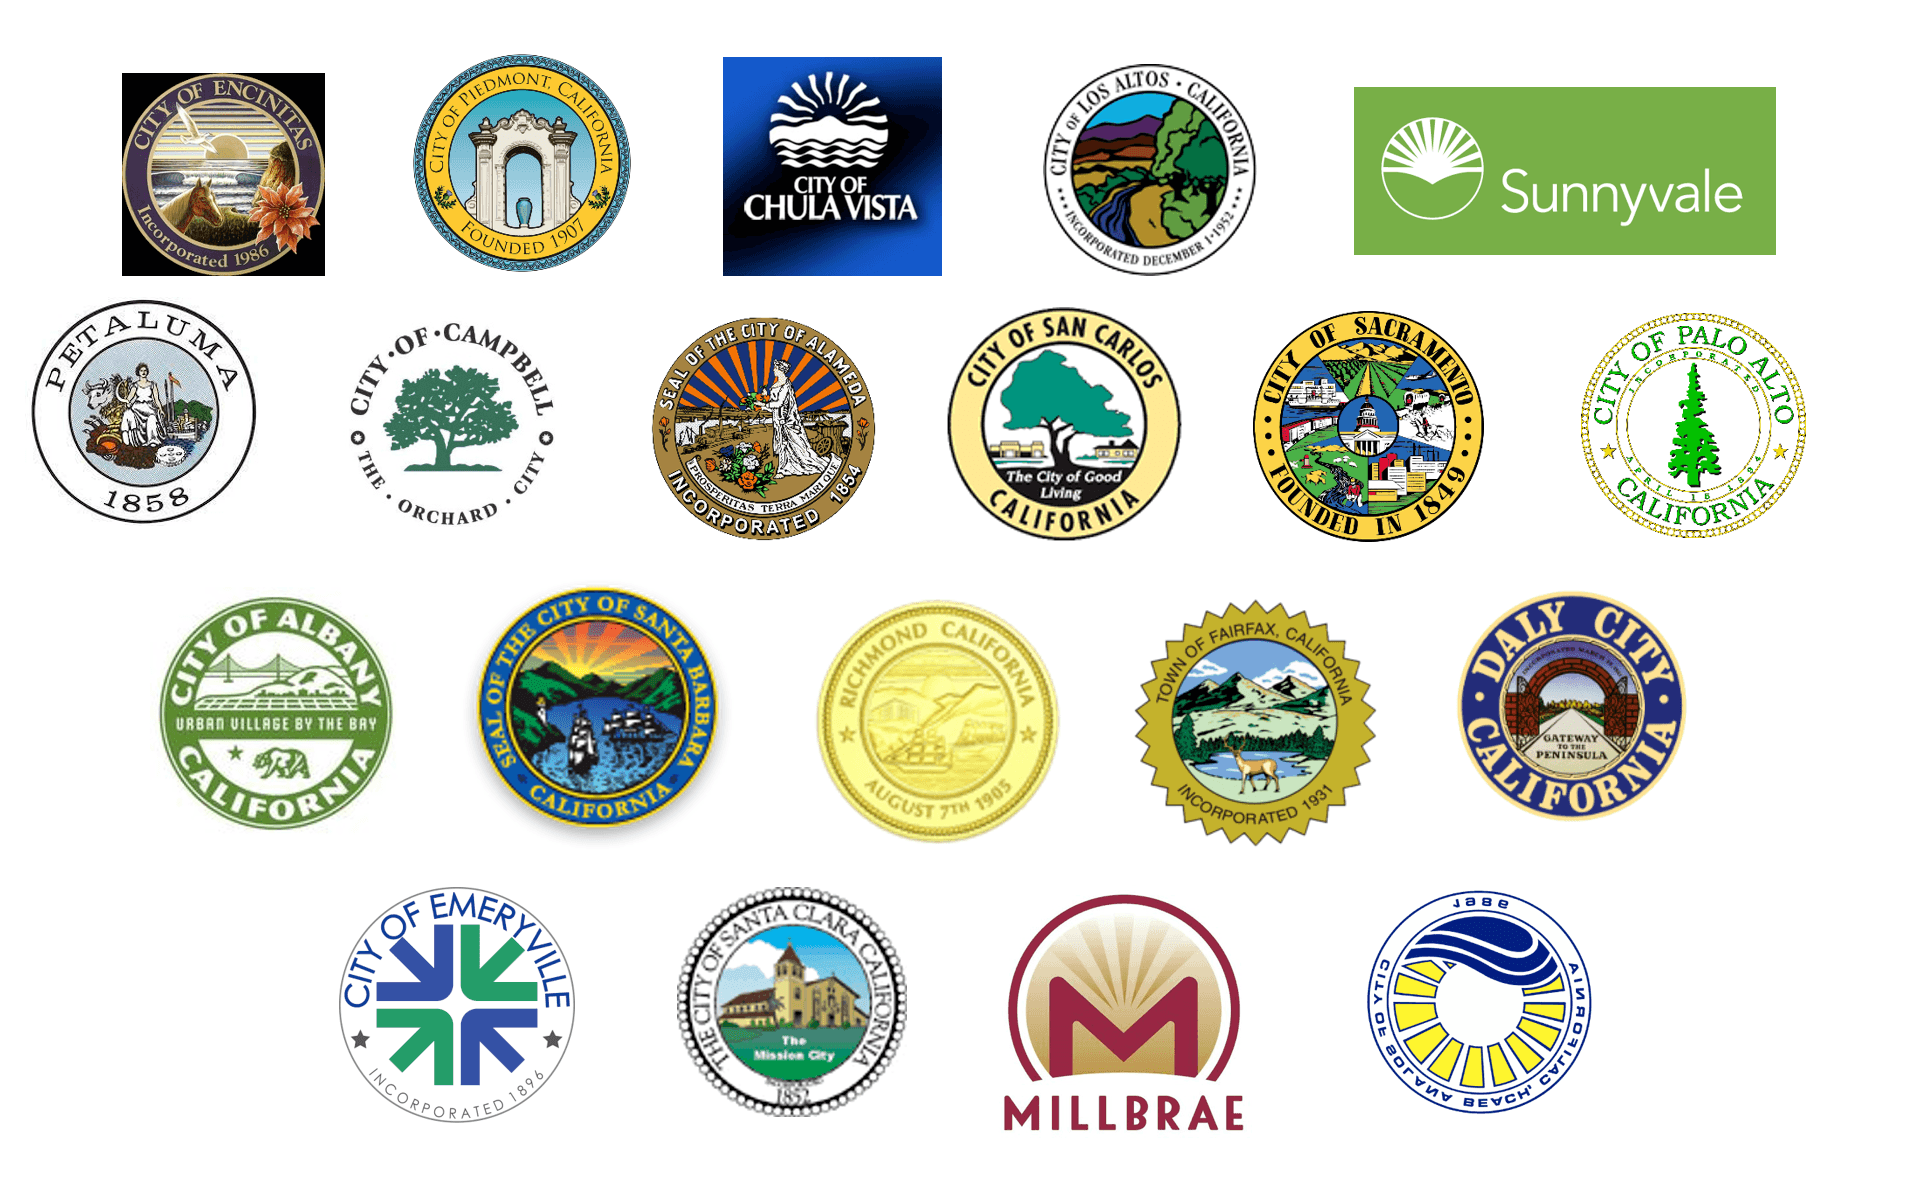 Collage of city seals adopting reach codes in 2021